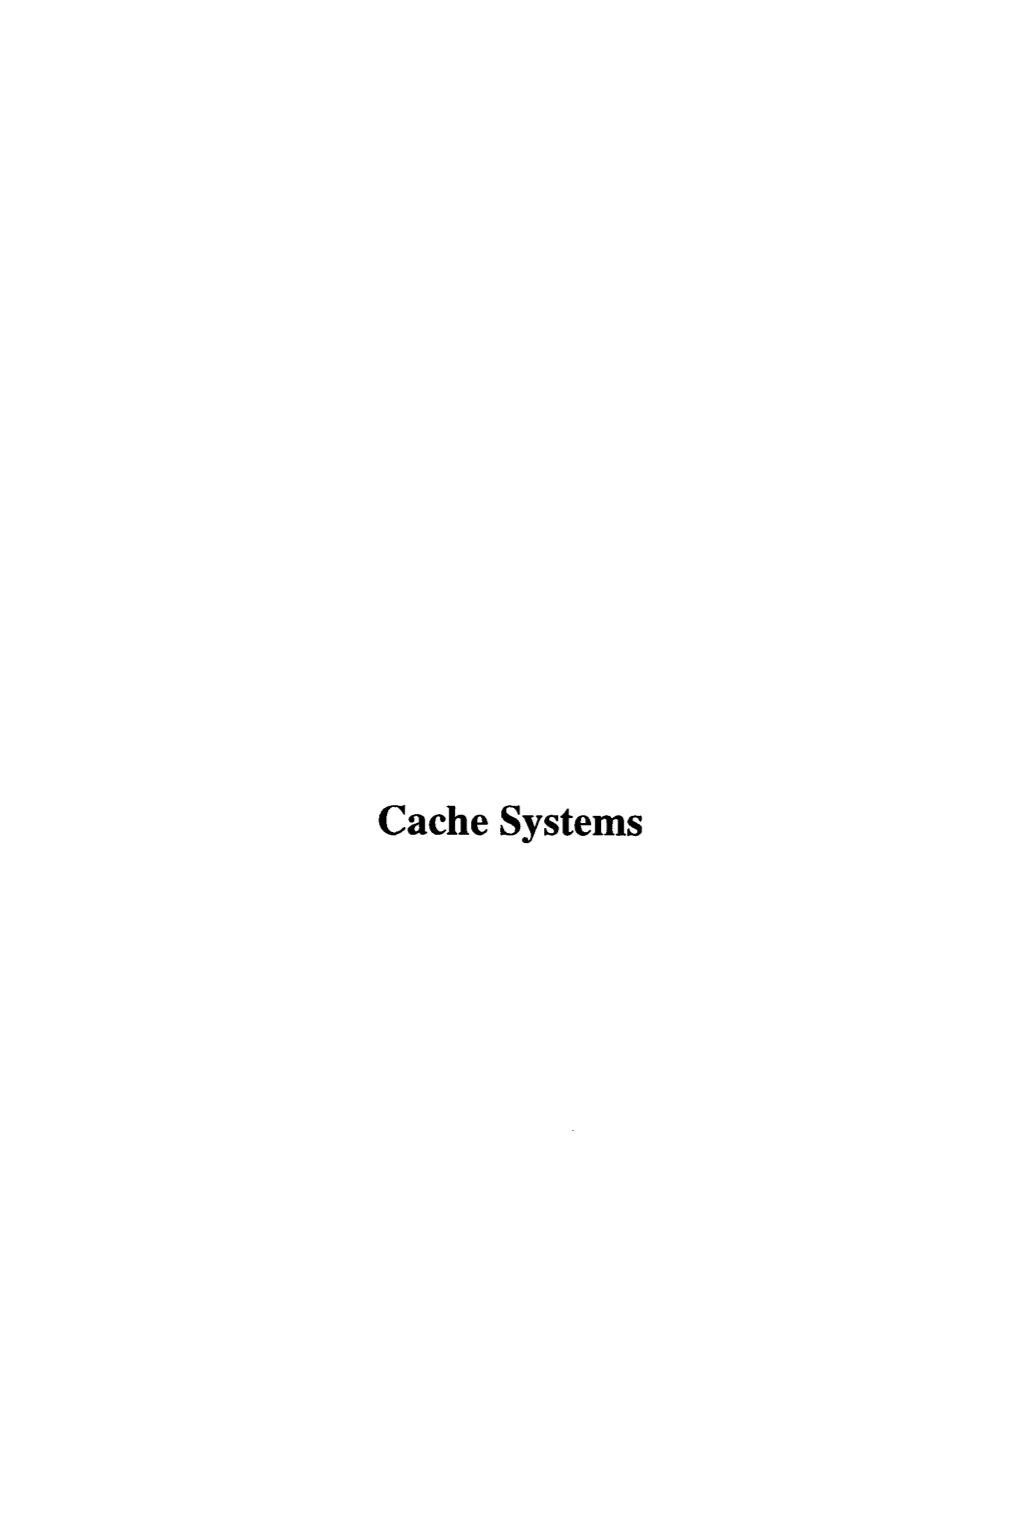 Exploiting Parallelism in Cache Coherency Protocol Engines